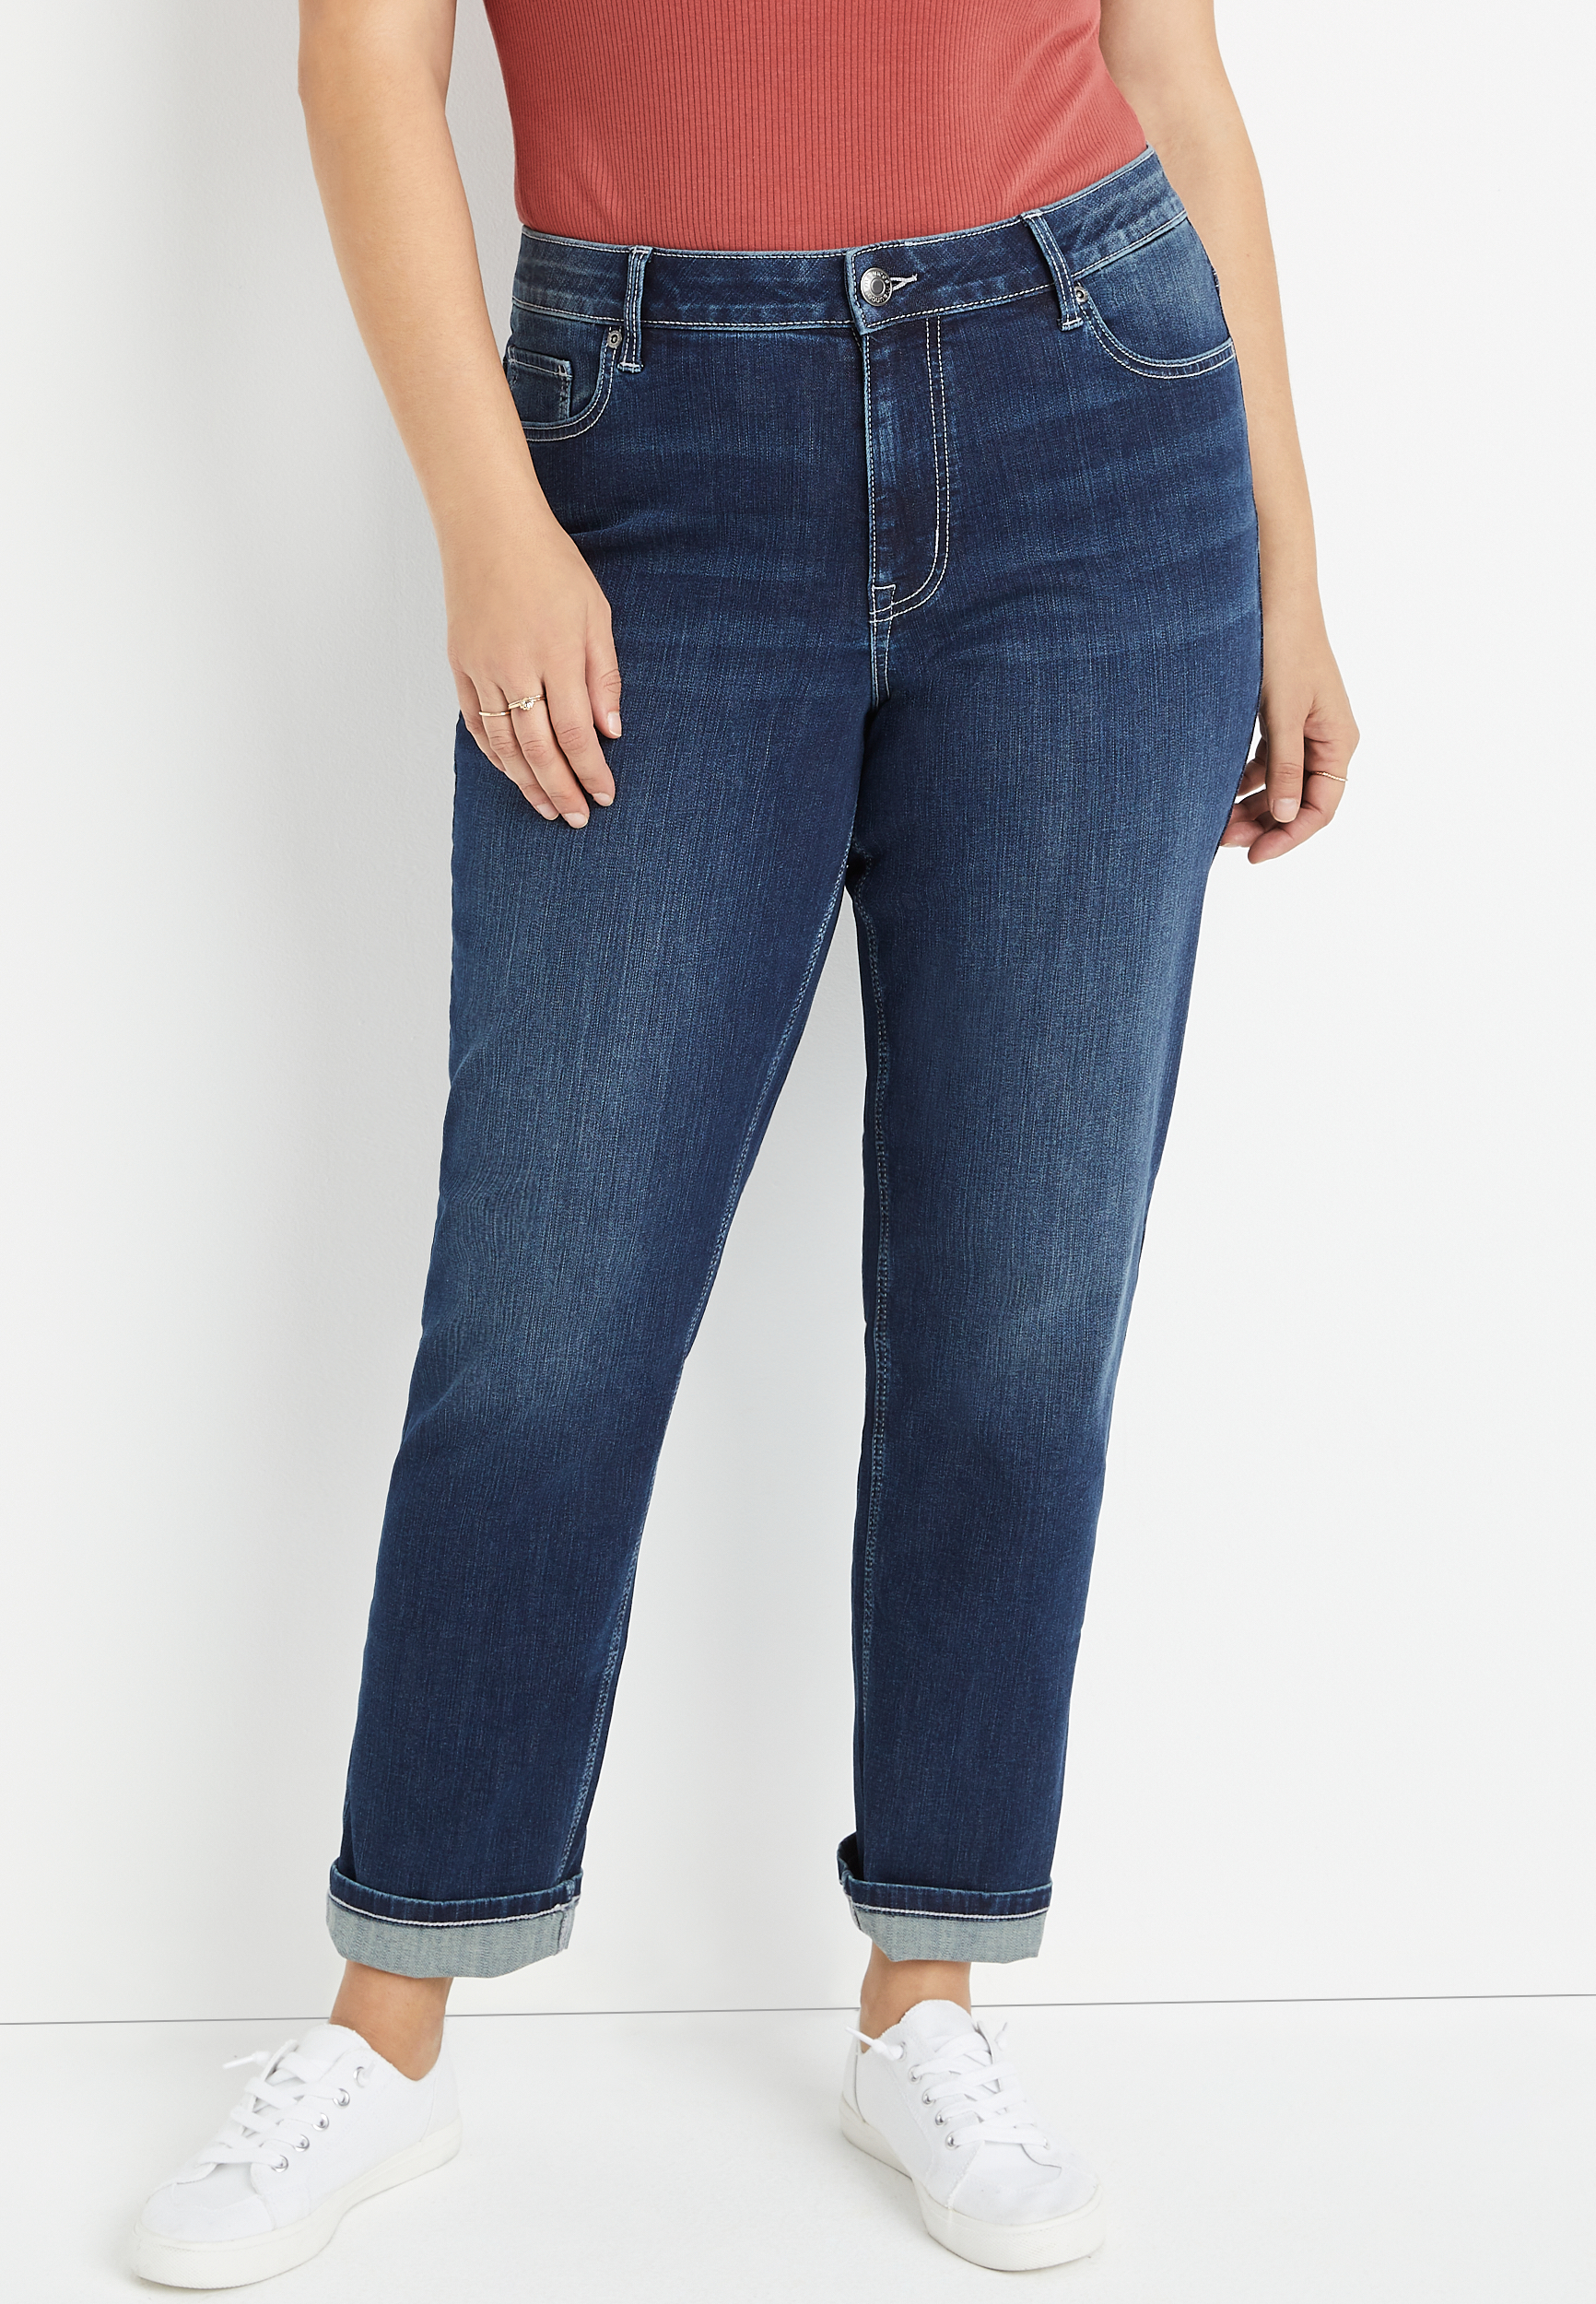 Plus Size m jeans by maurices™ Classic Curvy High Rise Jean | maurices